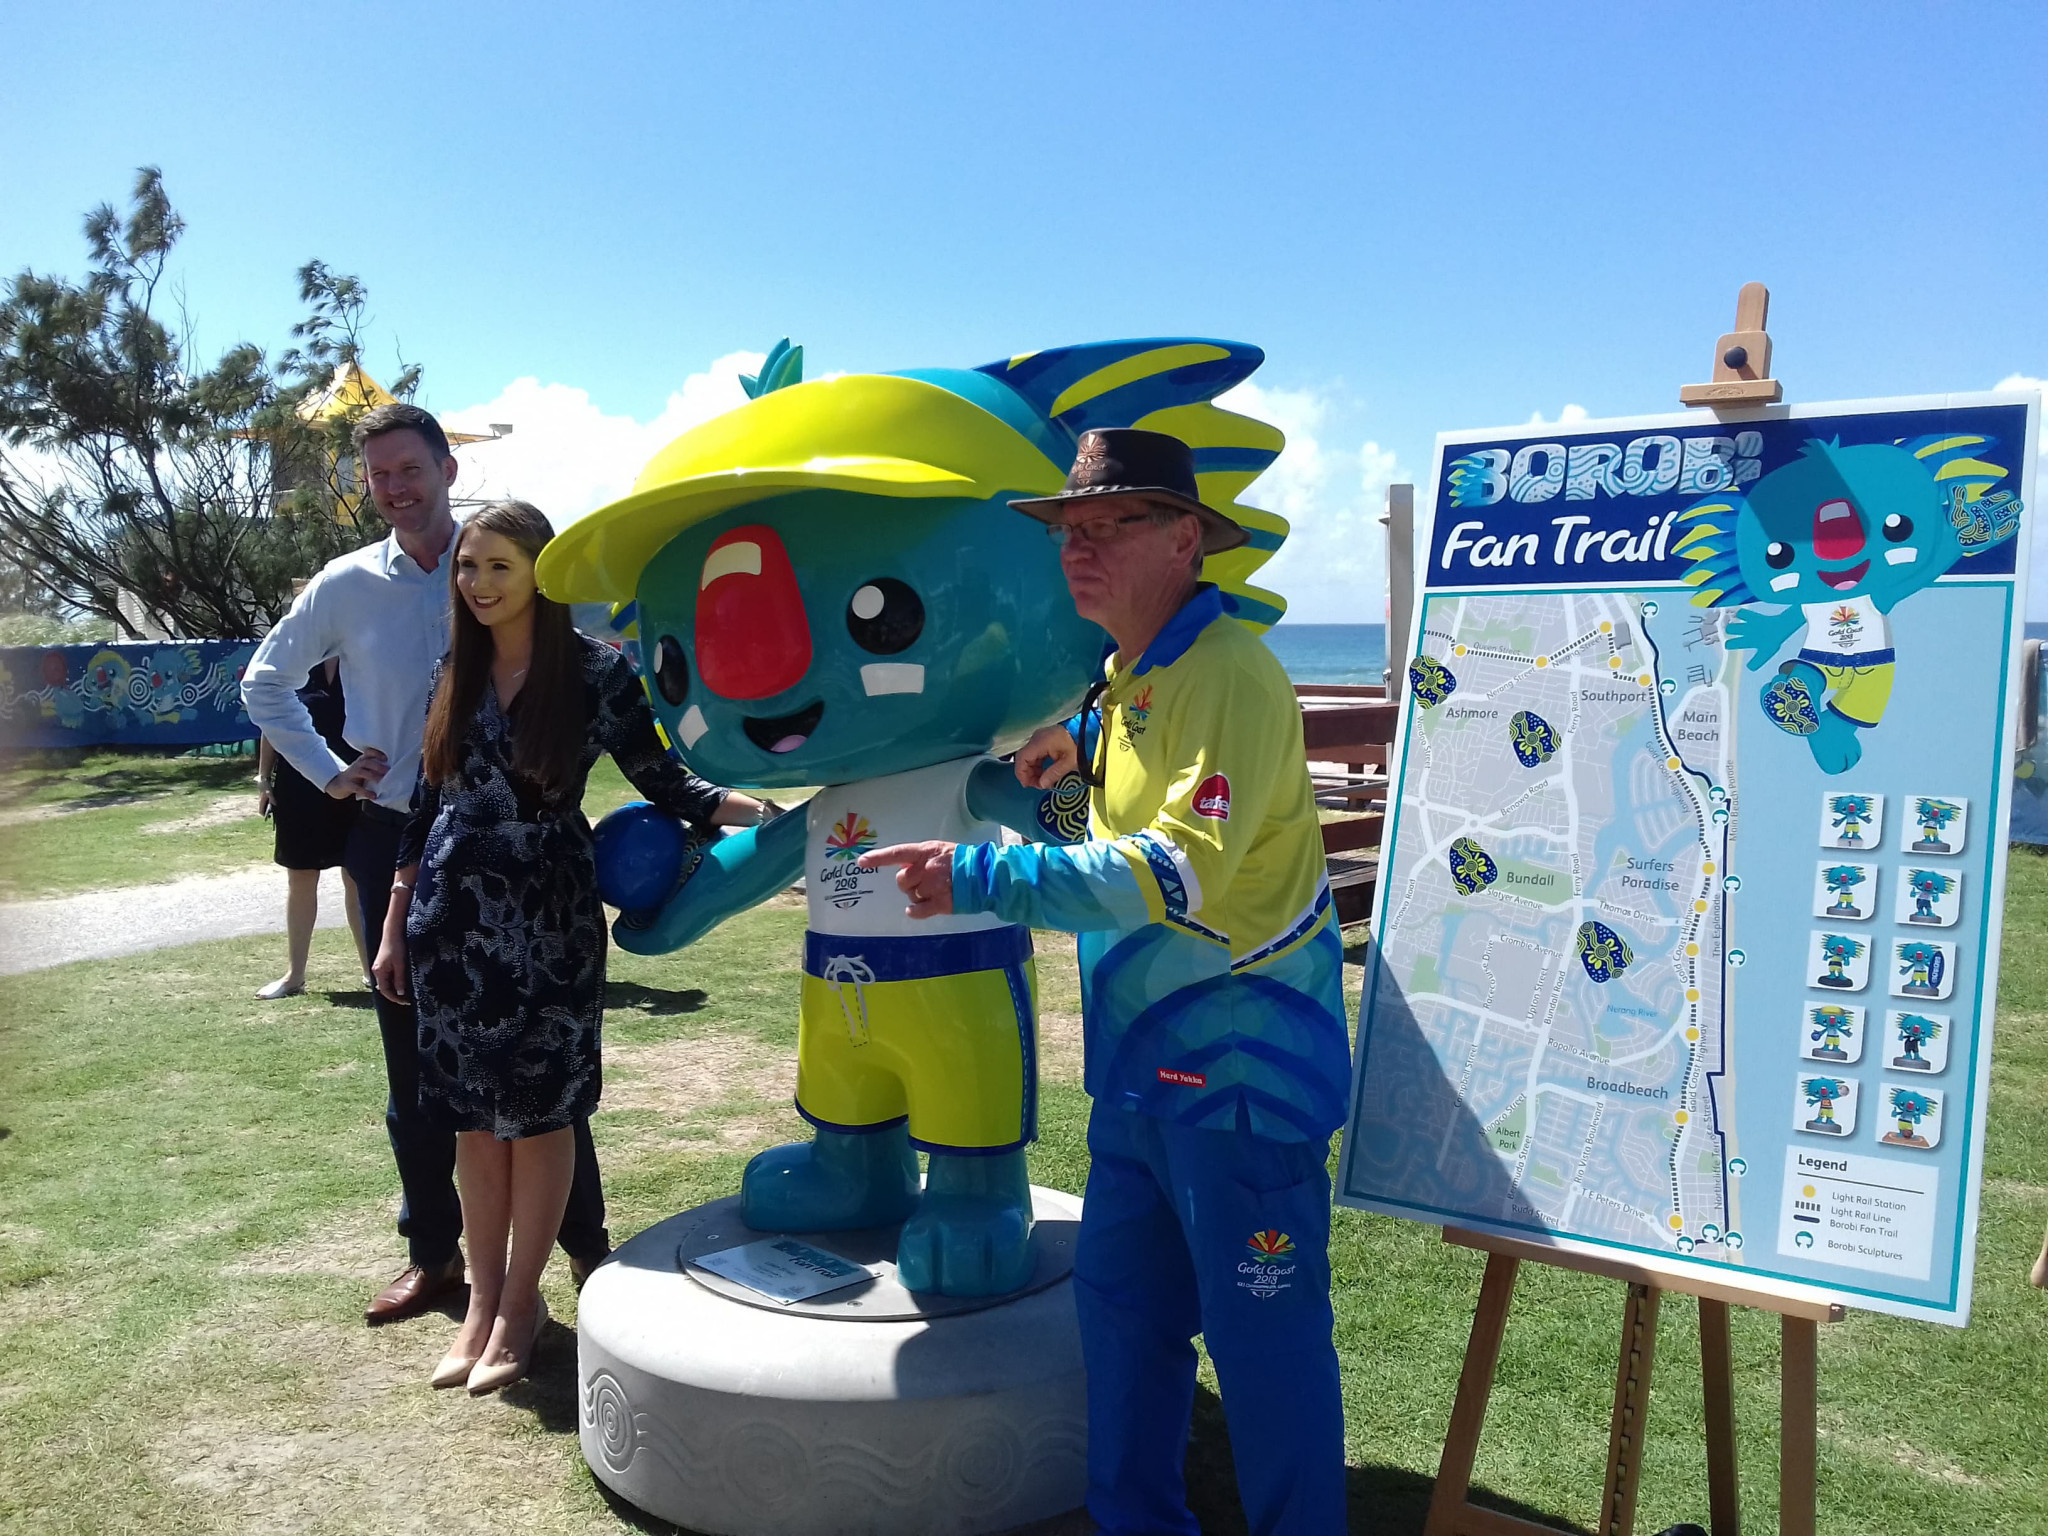 Gold Coast 2018 launched the trail at the Broadbeach lawn bowls venue ©ITG